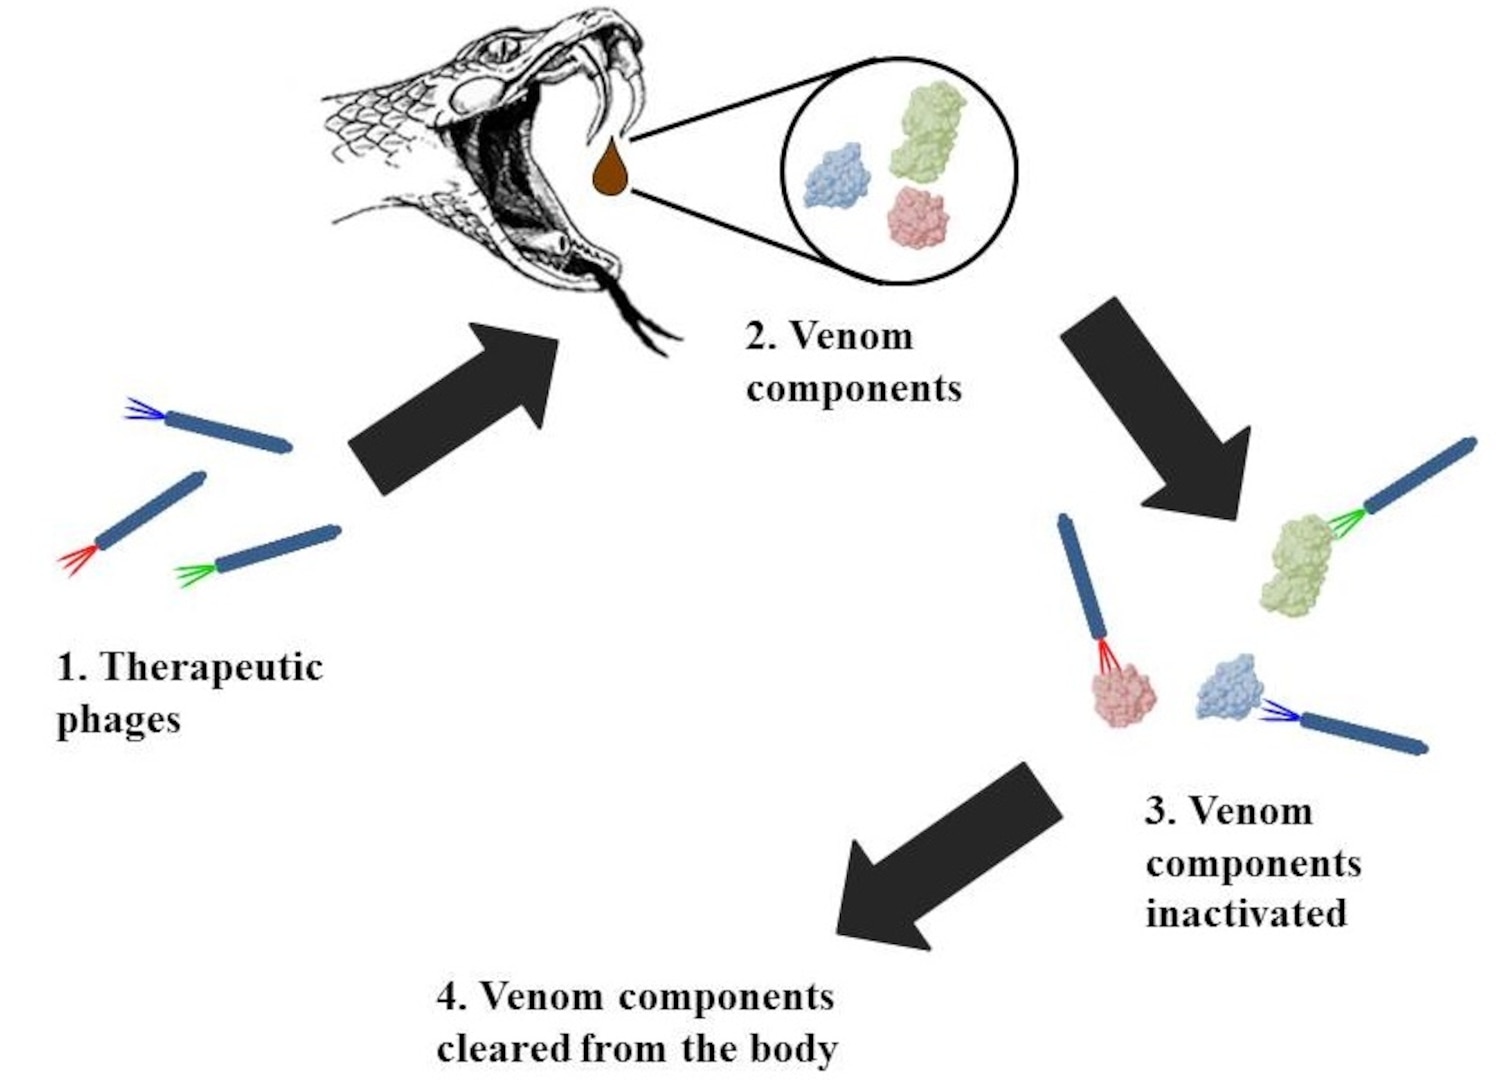 The illustration shows how therapeutic phages can be used as an antivenom in treating snakebites. Phages, which are viruses that infect bacteria, enter the body and target venom components. Once the phages stick to the venom components, they are able to inactivate the venom compounds and clear the compounds from the body. The research into the use of therapeutic phages is being conducted by Dr. Yoon Hwang, Naval Medical Research Unit San Antonio research scientist.